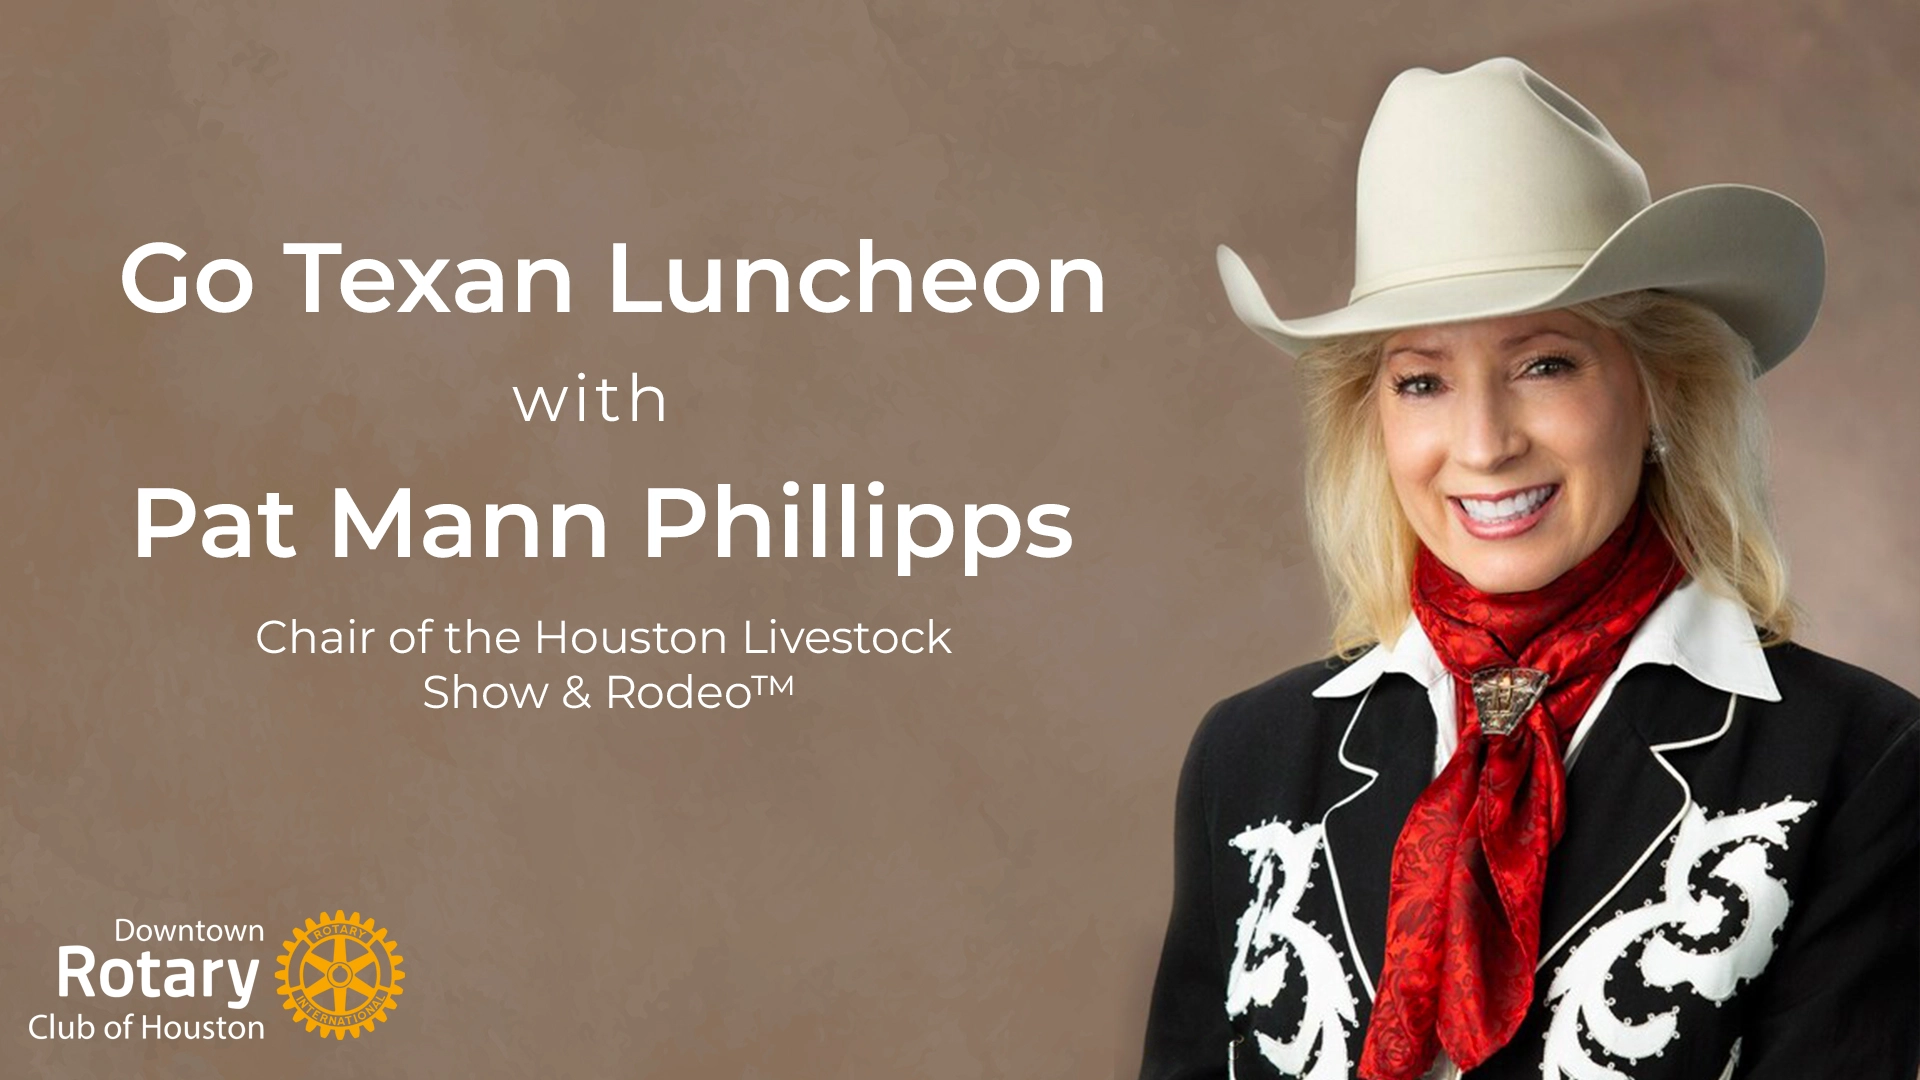 Go Texan Luncheon with Pat Mann Phillipps, Chair of the Houston Livestock Show & Rodeo™️